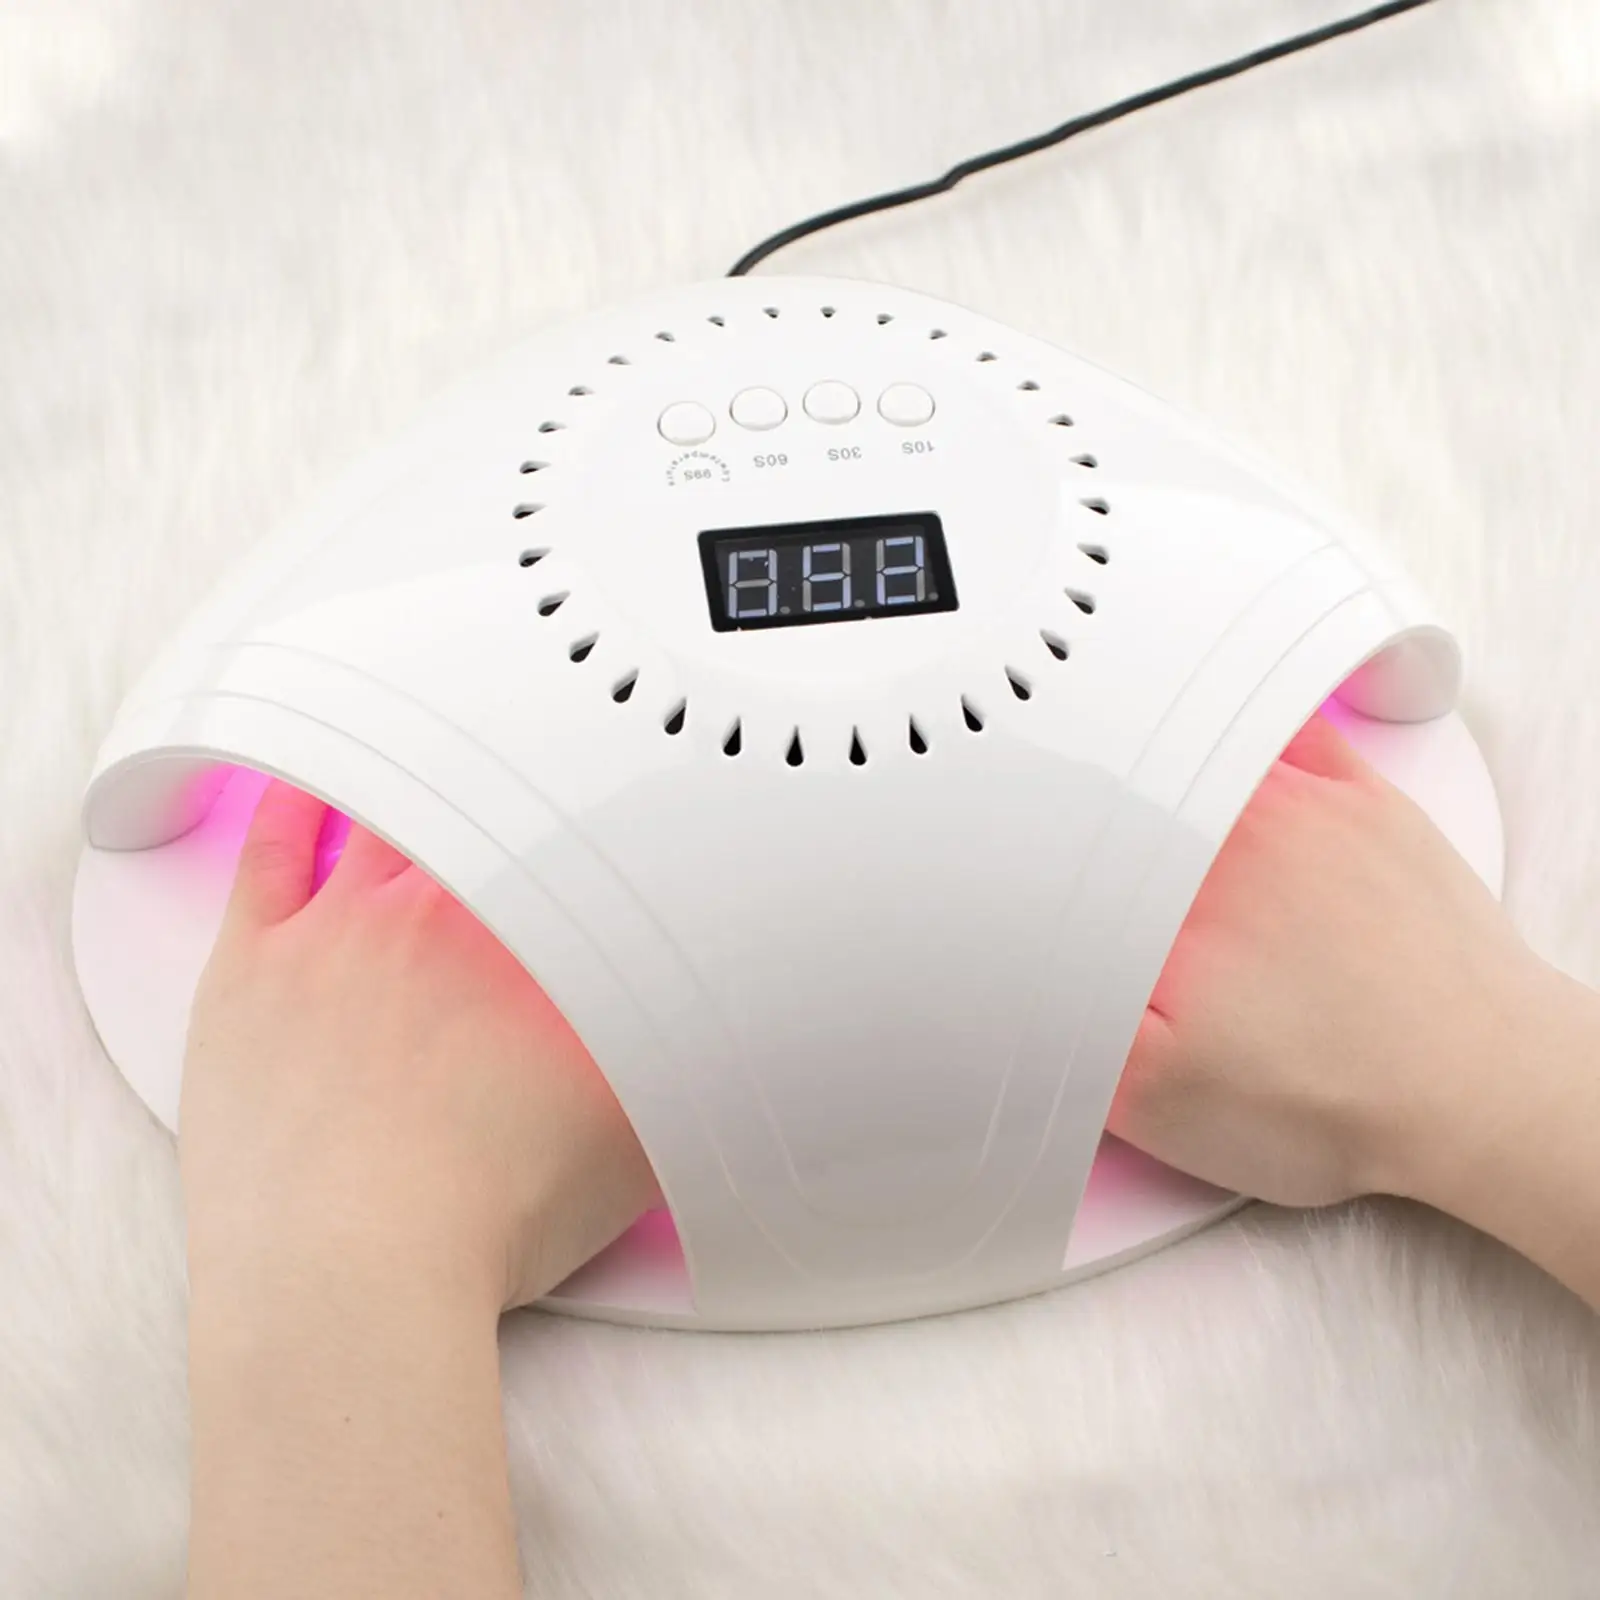 UV LED Nail Lamp Two Hands Auto-Sensor 86W Professional Larger Space Gel Lamp UV Light for Manicure Foot Drying Nails Girl Woman